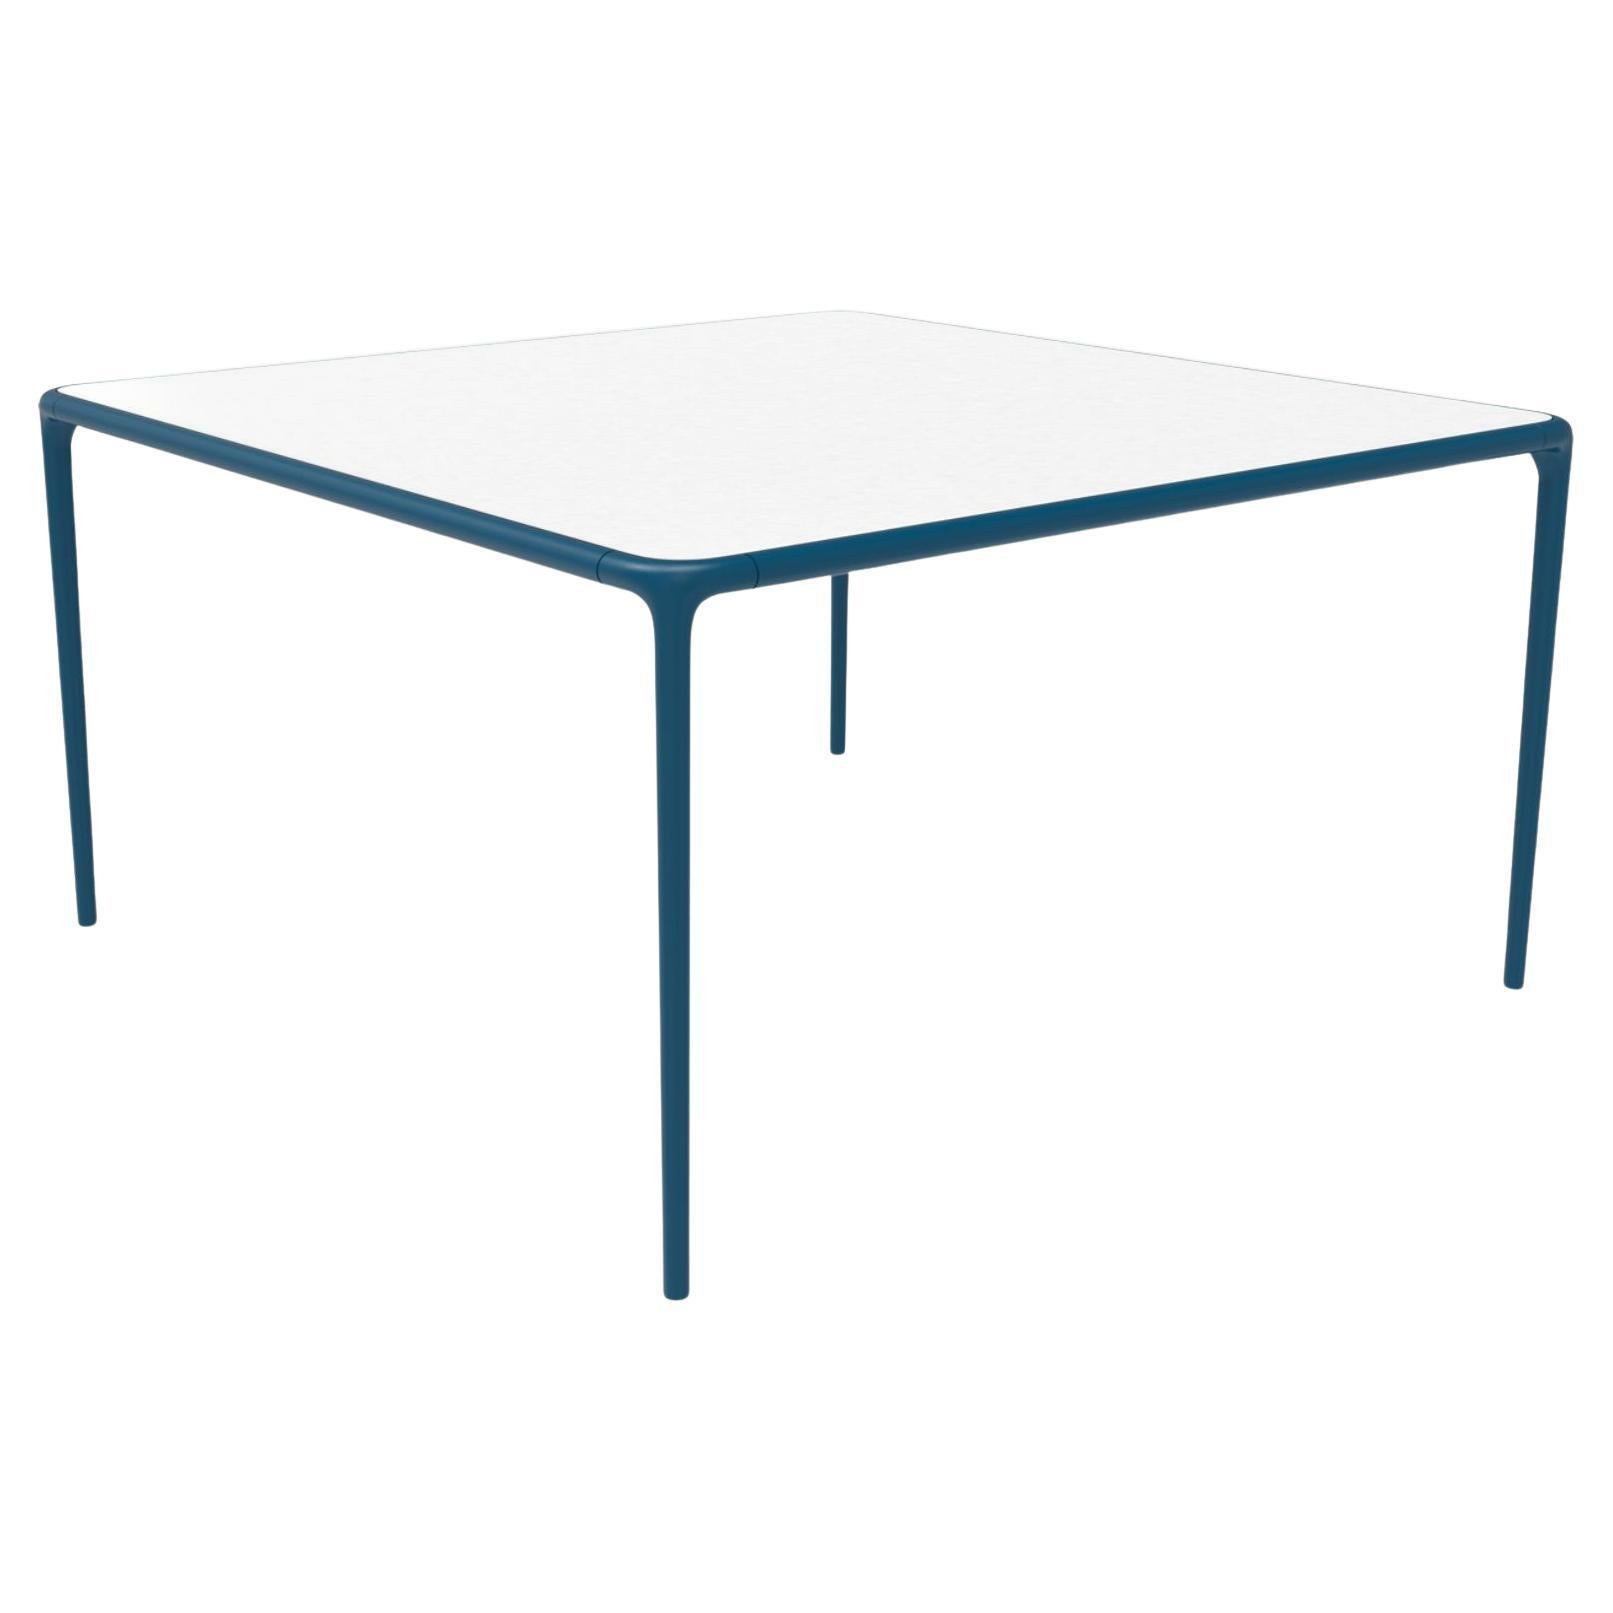 Xaloc Navy Glass Top Table 140 by Mowee